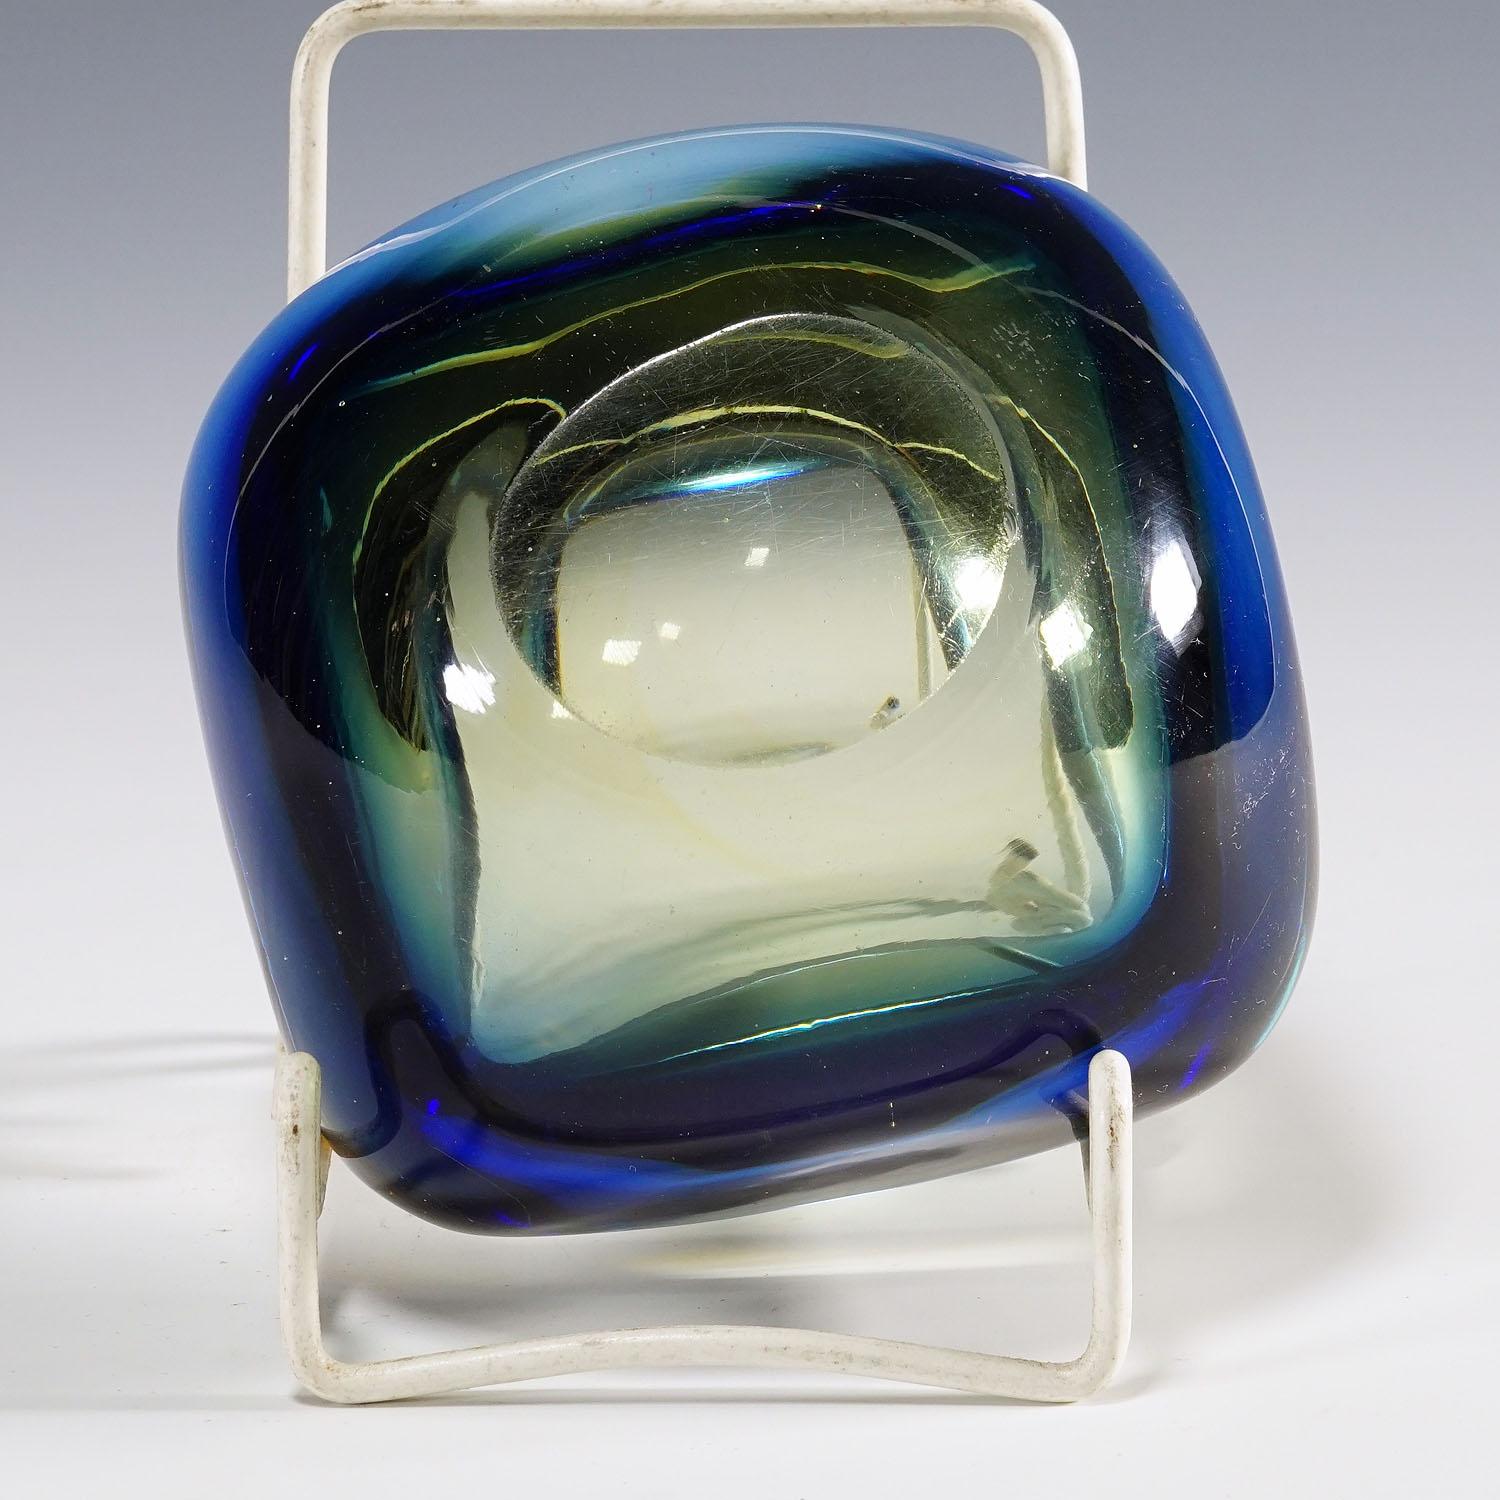 Midcentury Modern Murano Blue and Yellow Sommerso Art Glass Bowl 1960s For Sale 2